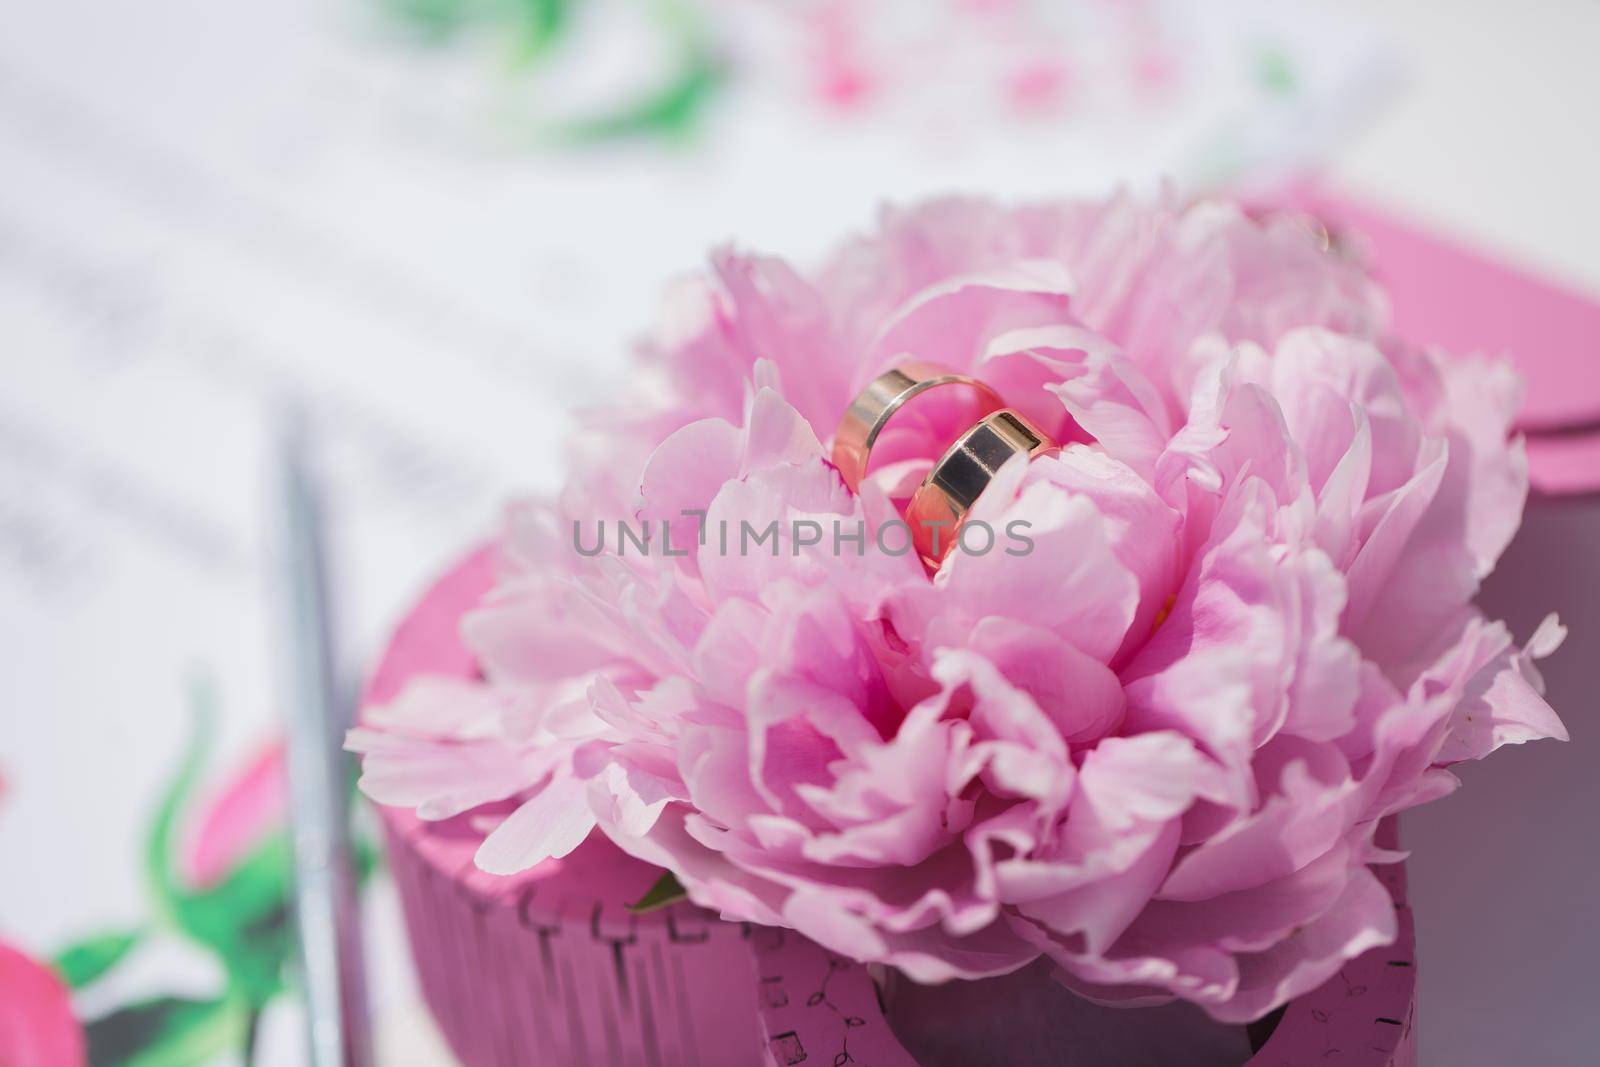 Gold wedding rings on a background of flowers peony. Wedding card with flowers peony closeup.